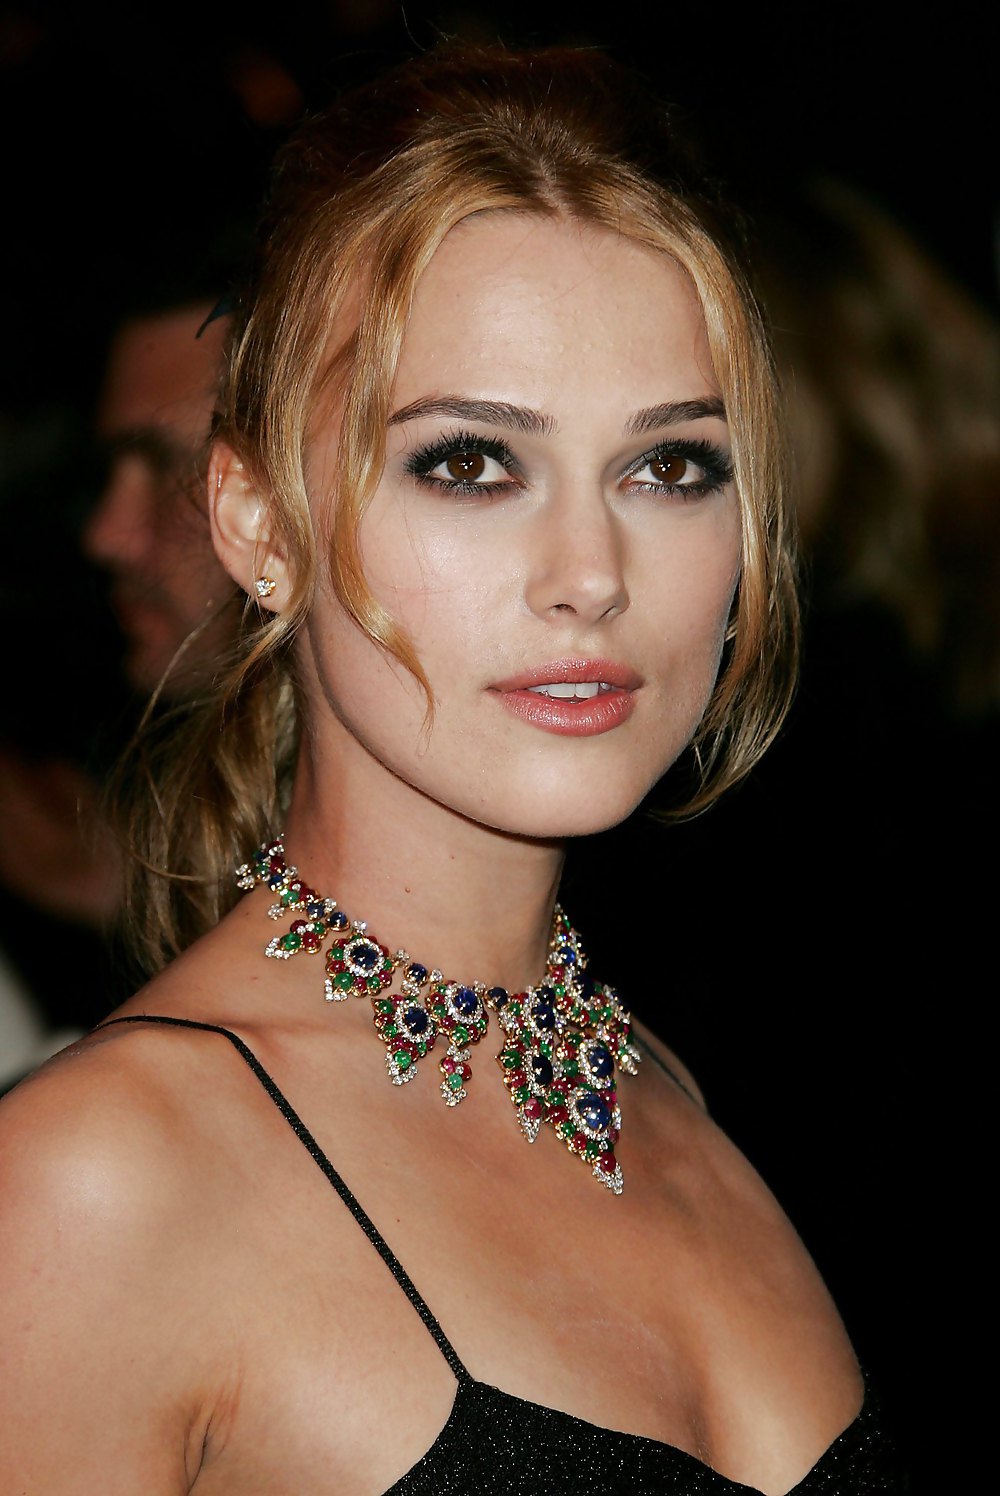 Keira Knightley The Royal Lady of England #35650551